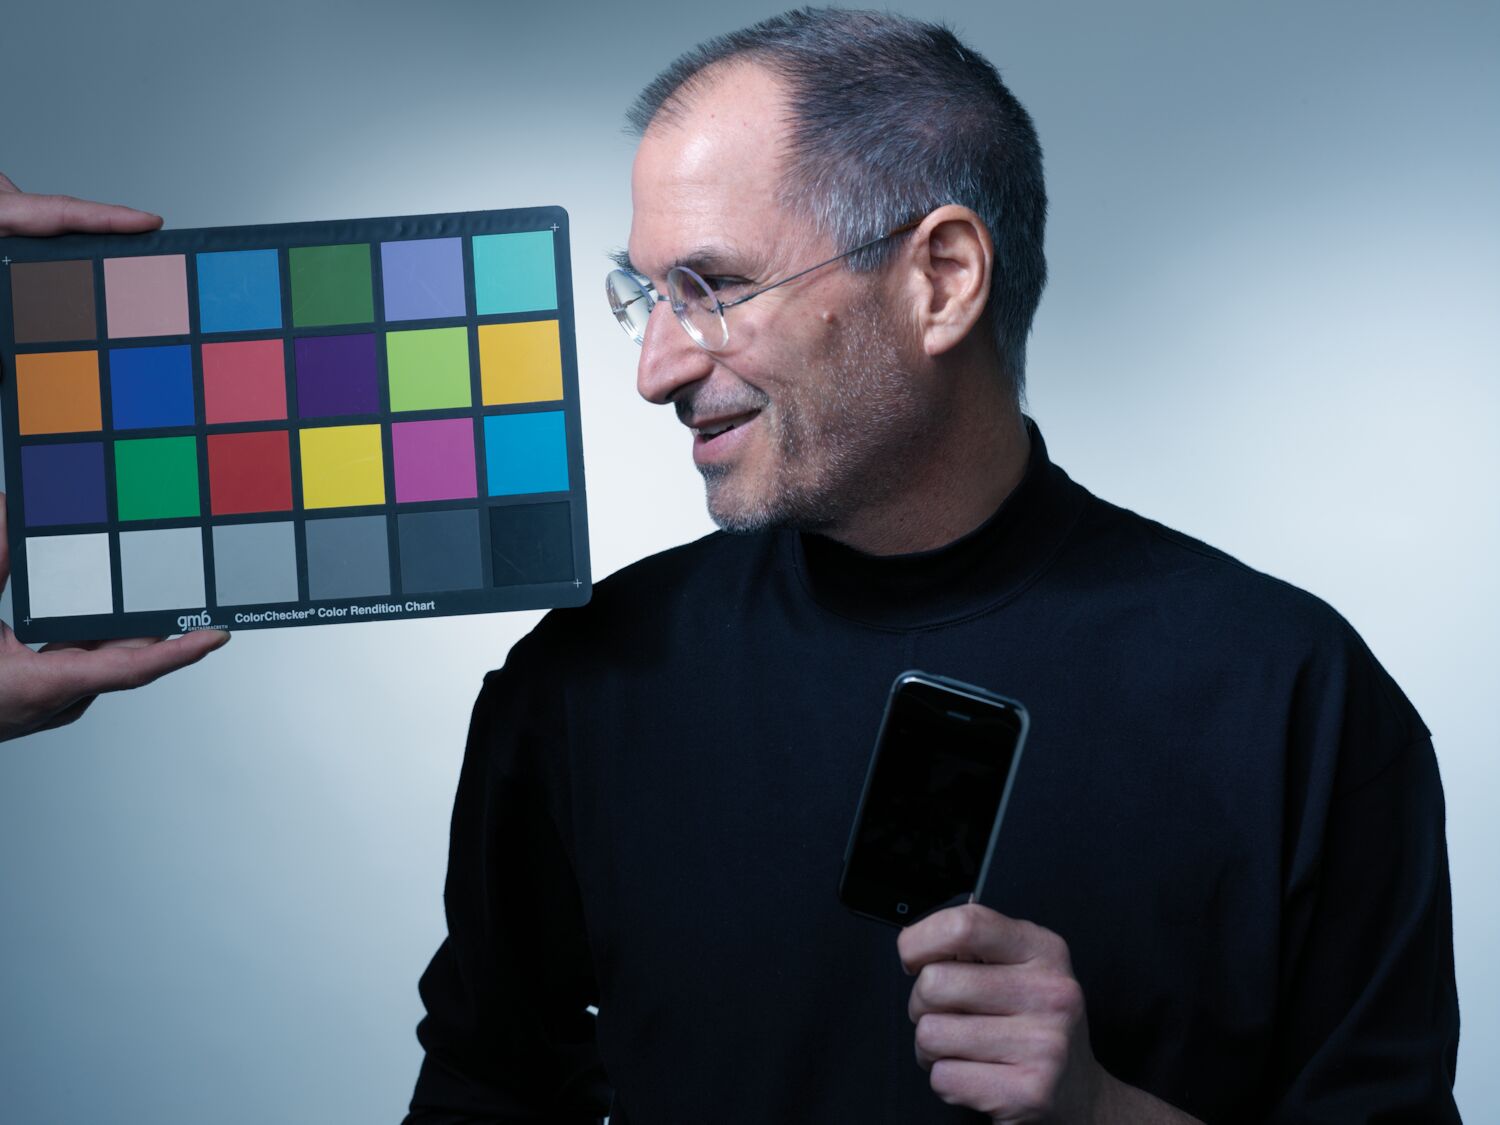 Steve, holding an iPhone, smiles and looks to the side as a pair of hands enters the frame, holding a color chart.